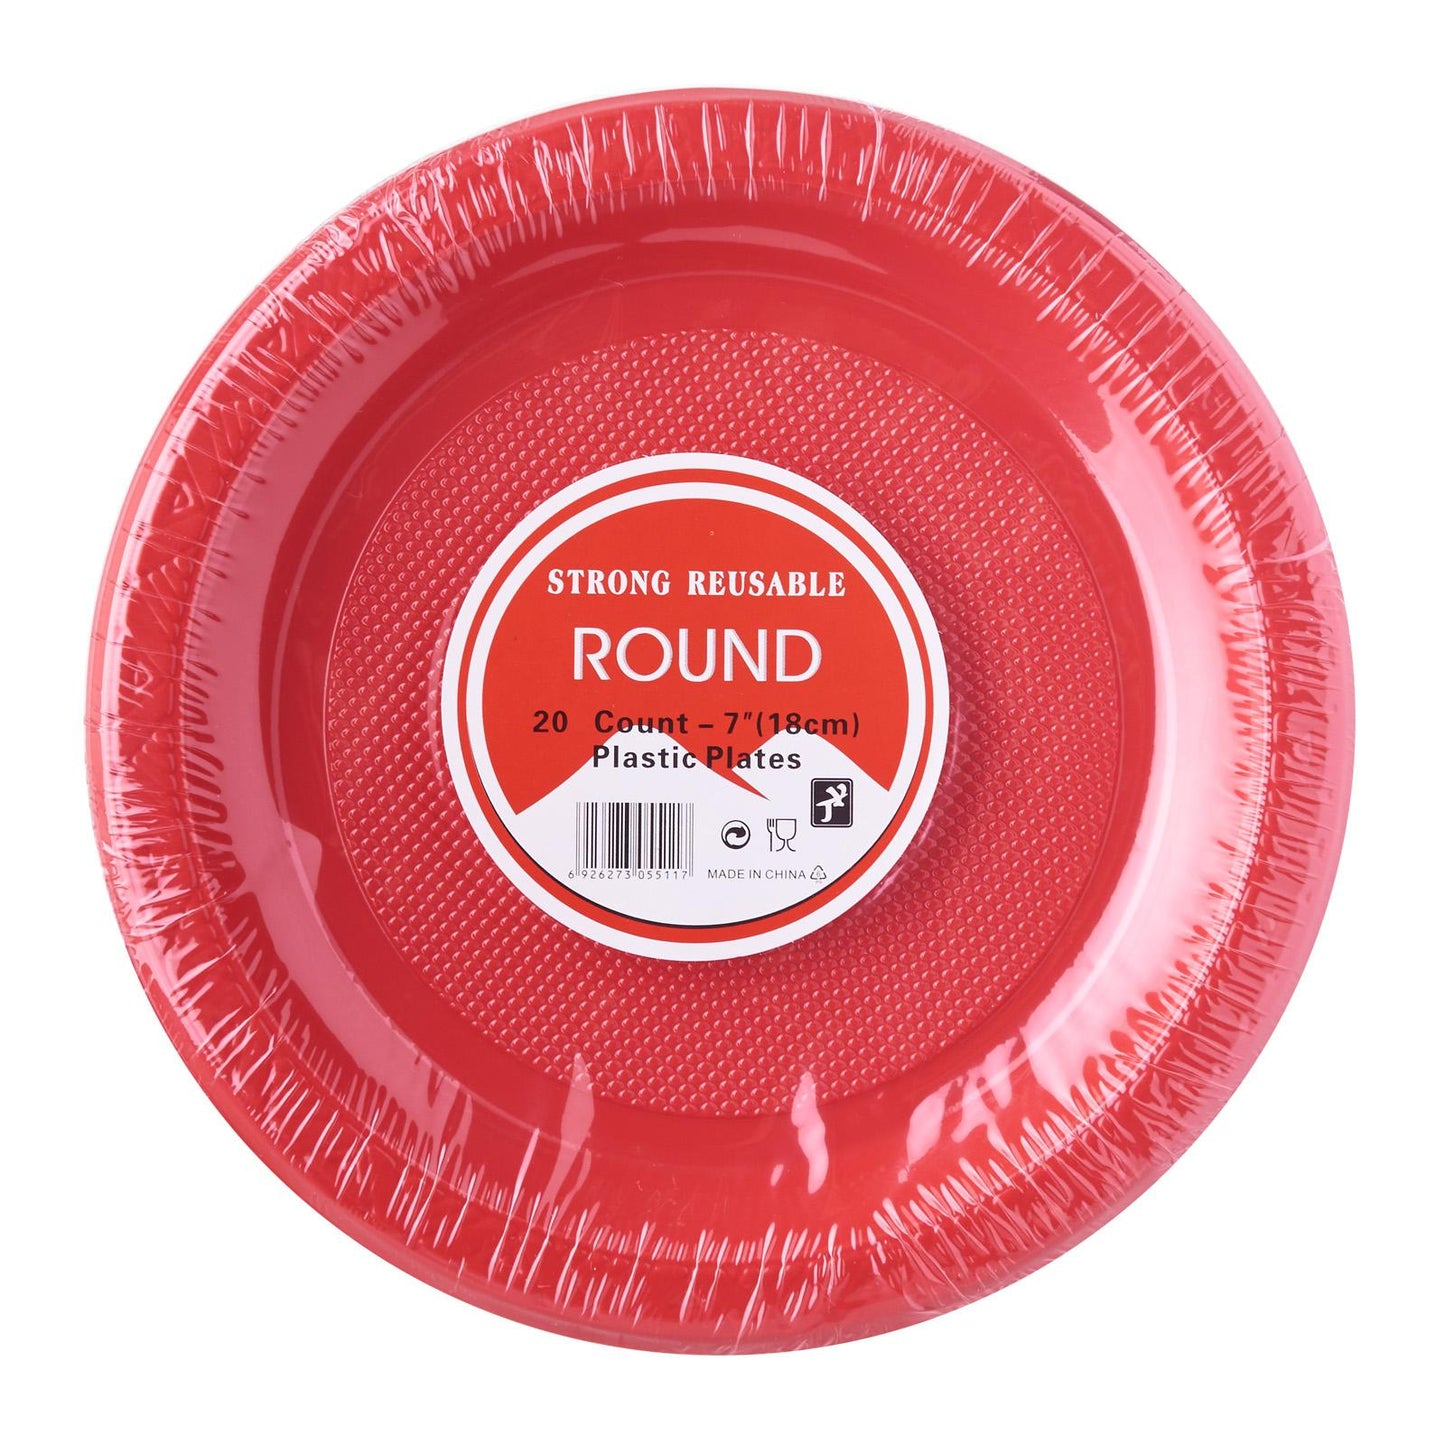 9inch Round Solid Color Plastic Plates